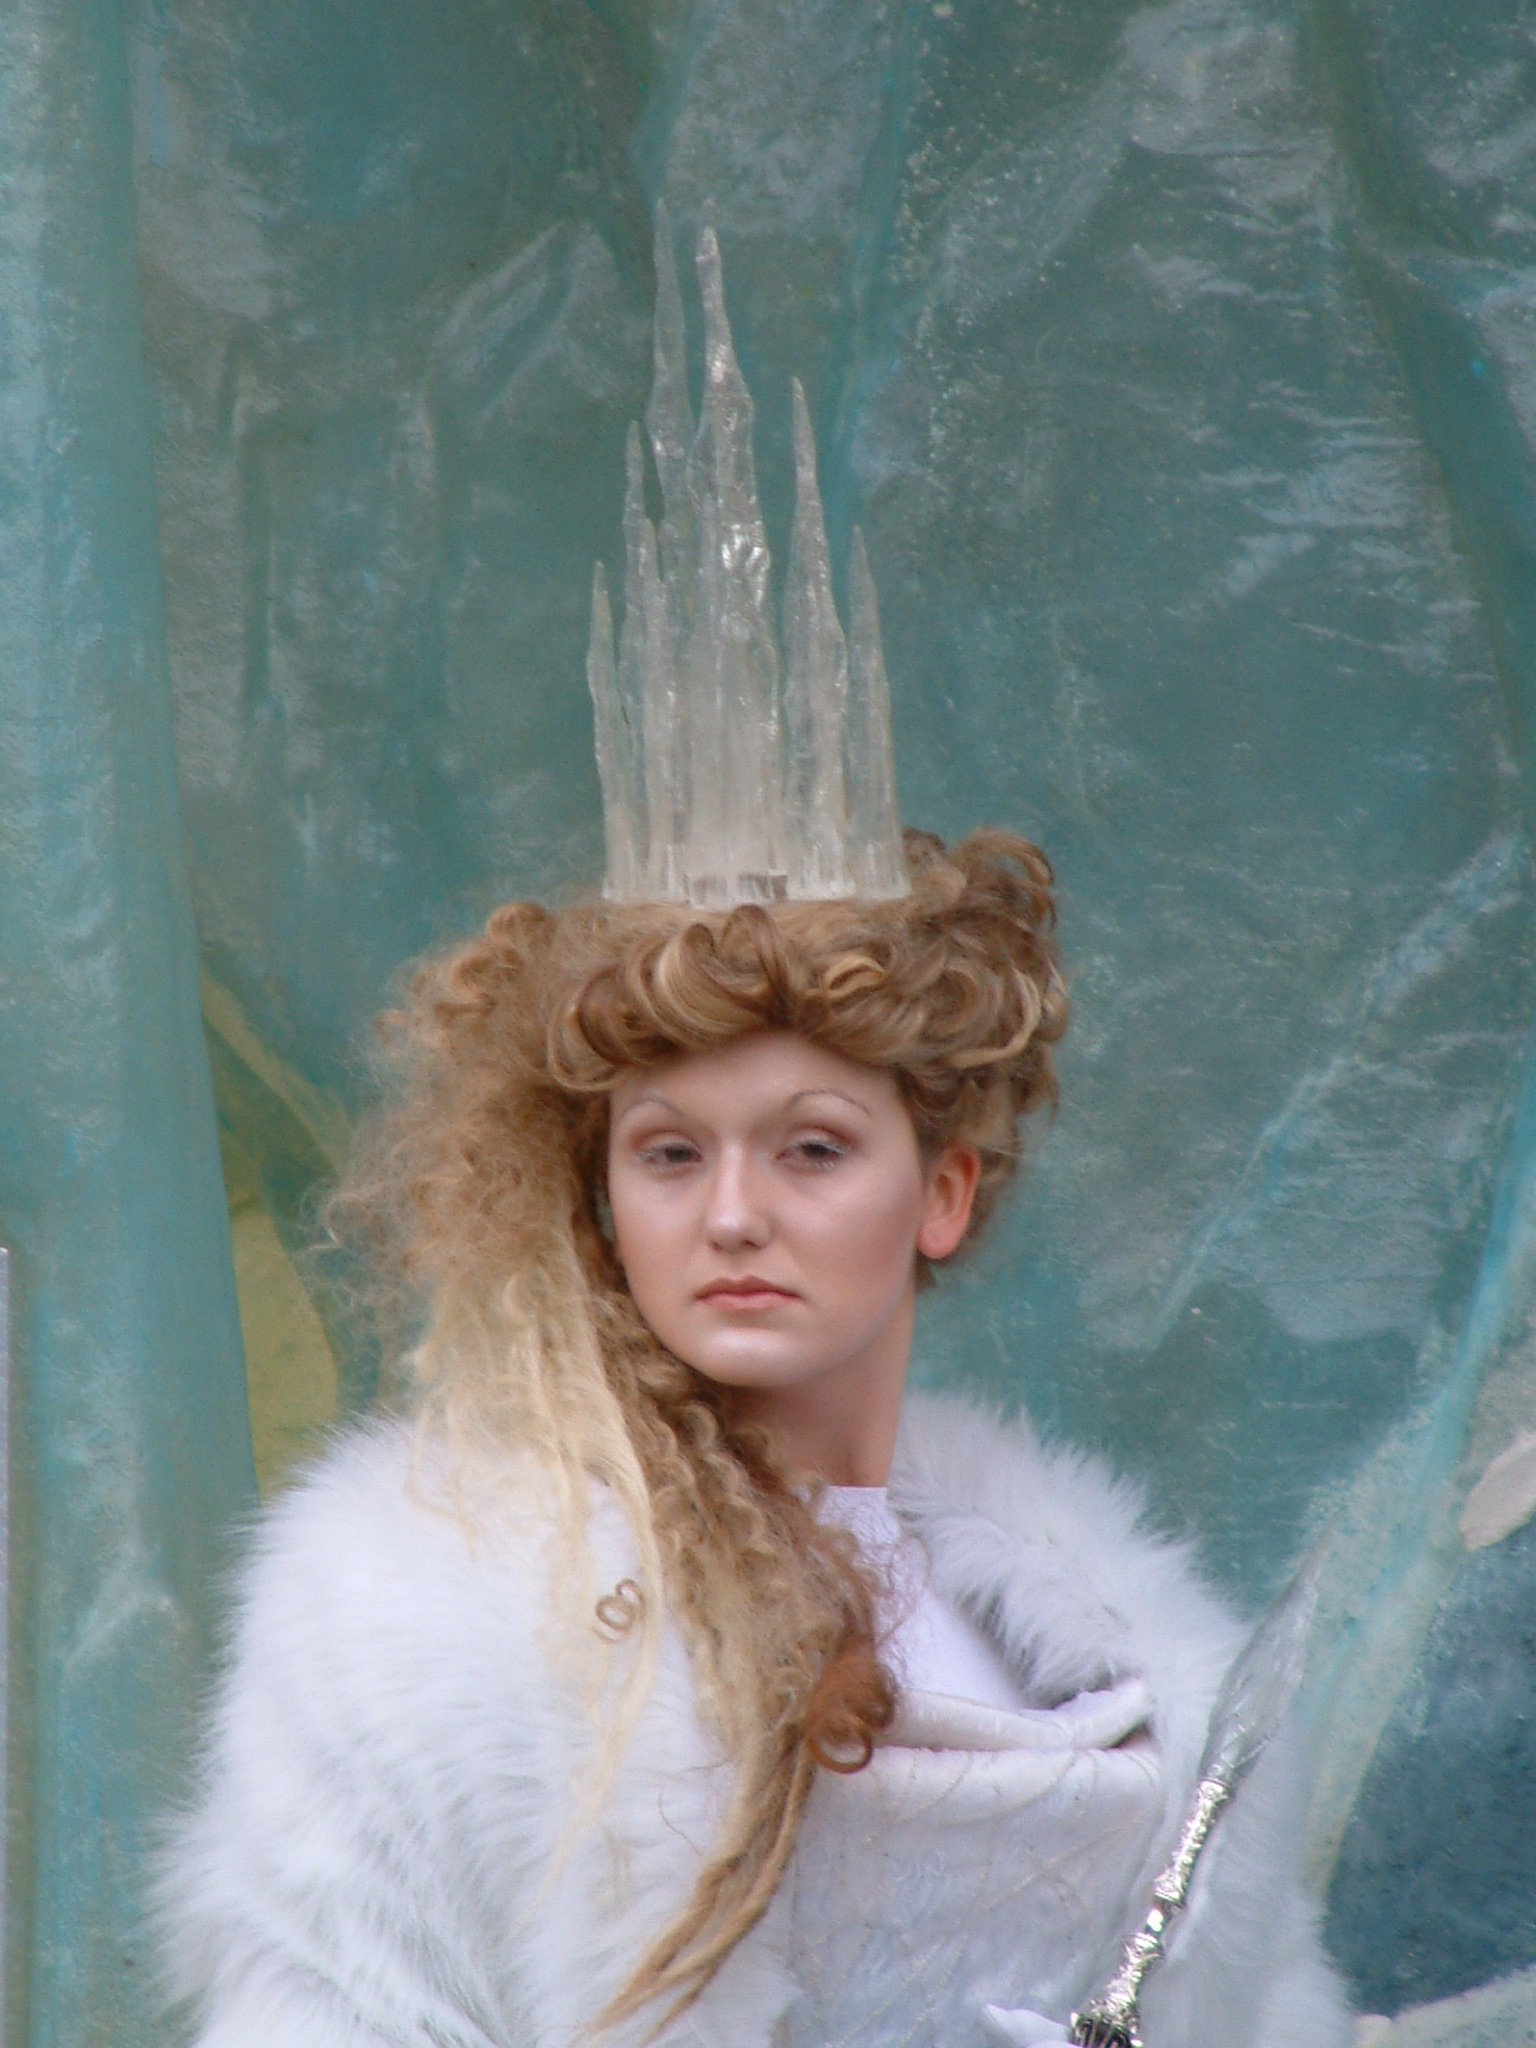 Worldwide Wednesdays - Jadis: The White Witch or Queen of Narnia ...